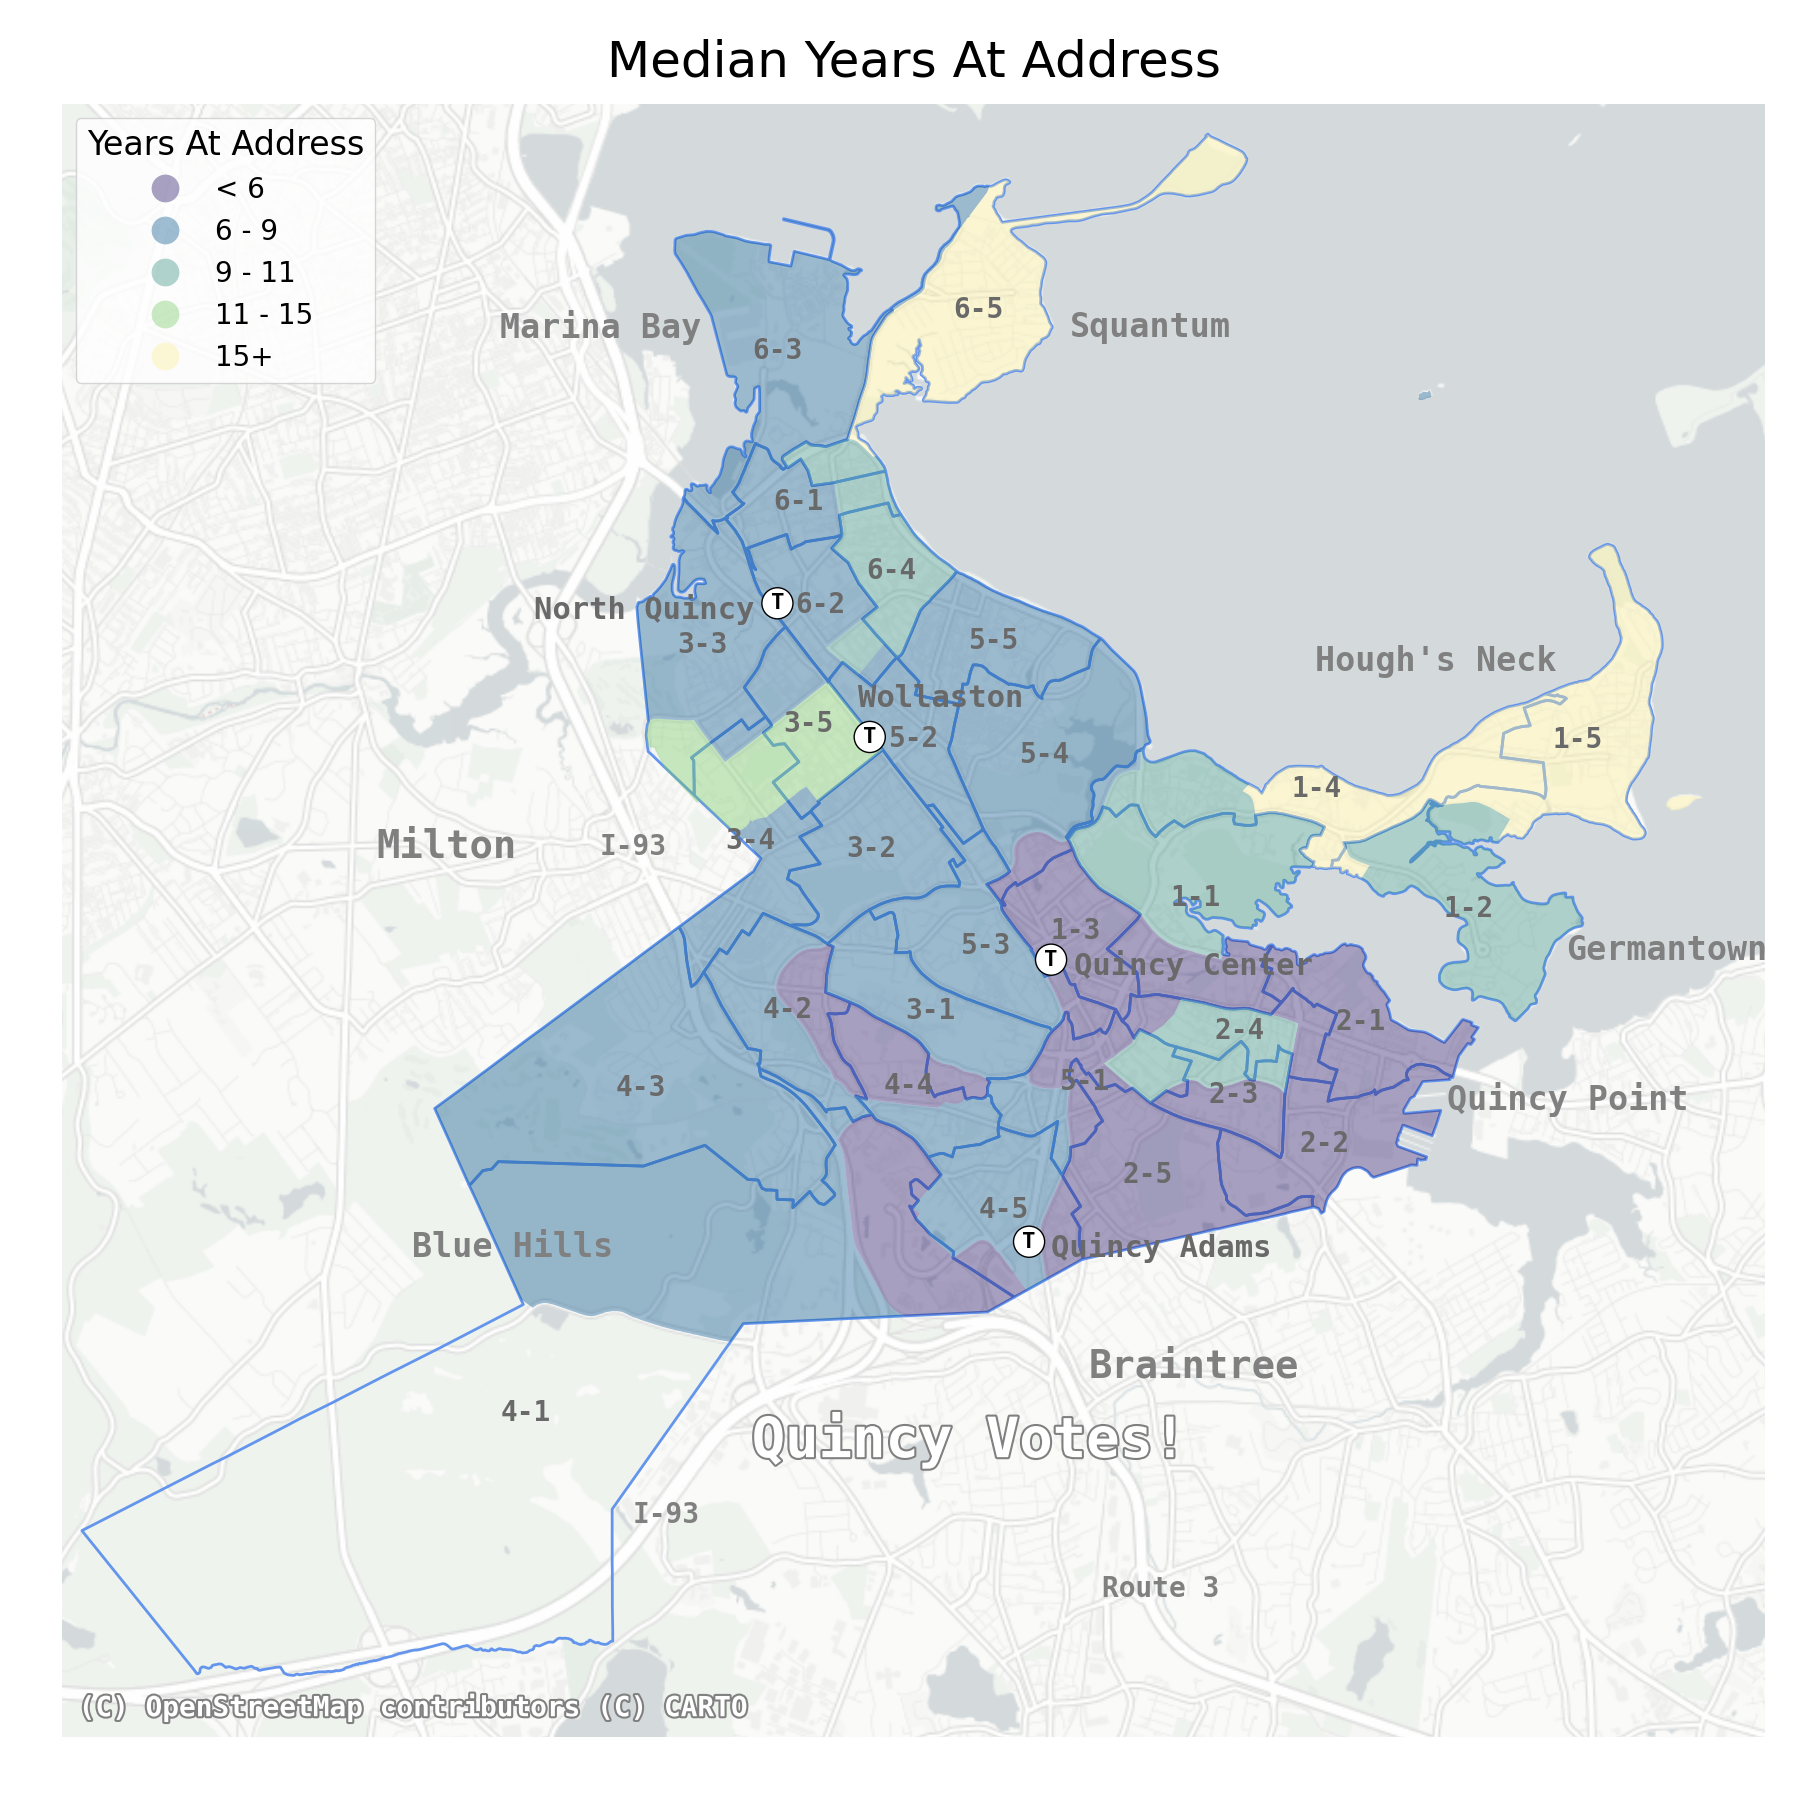 median_years_at_address (3).png